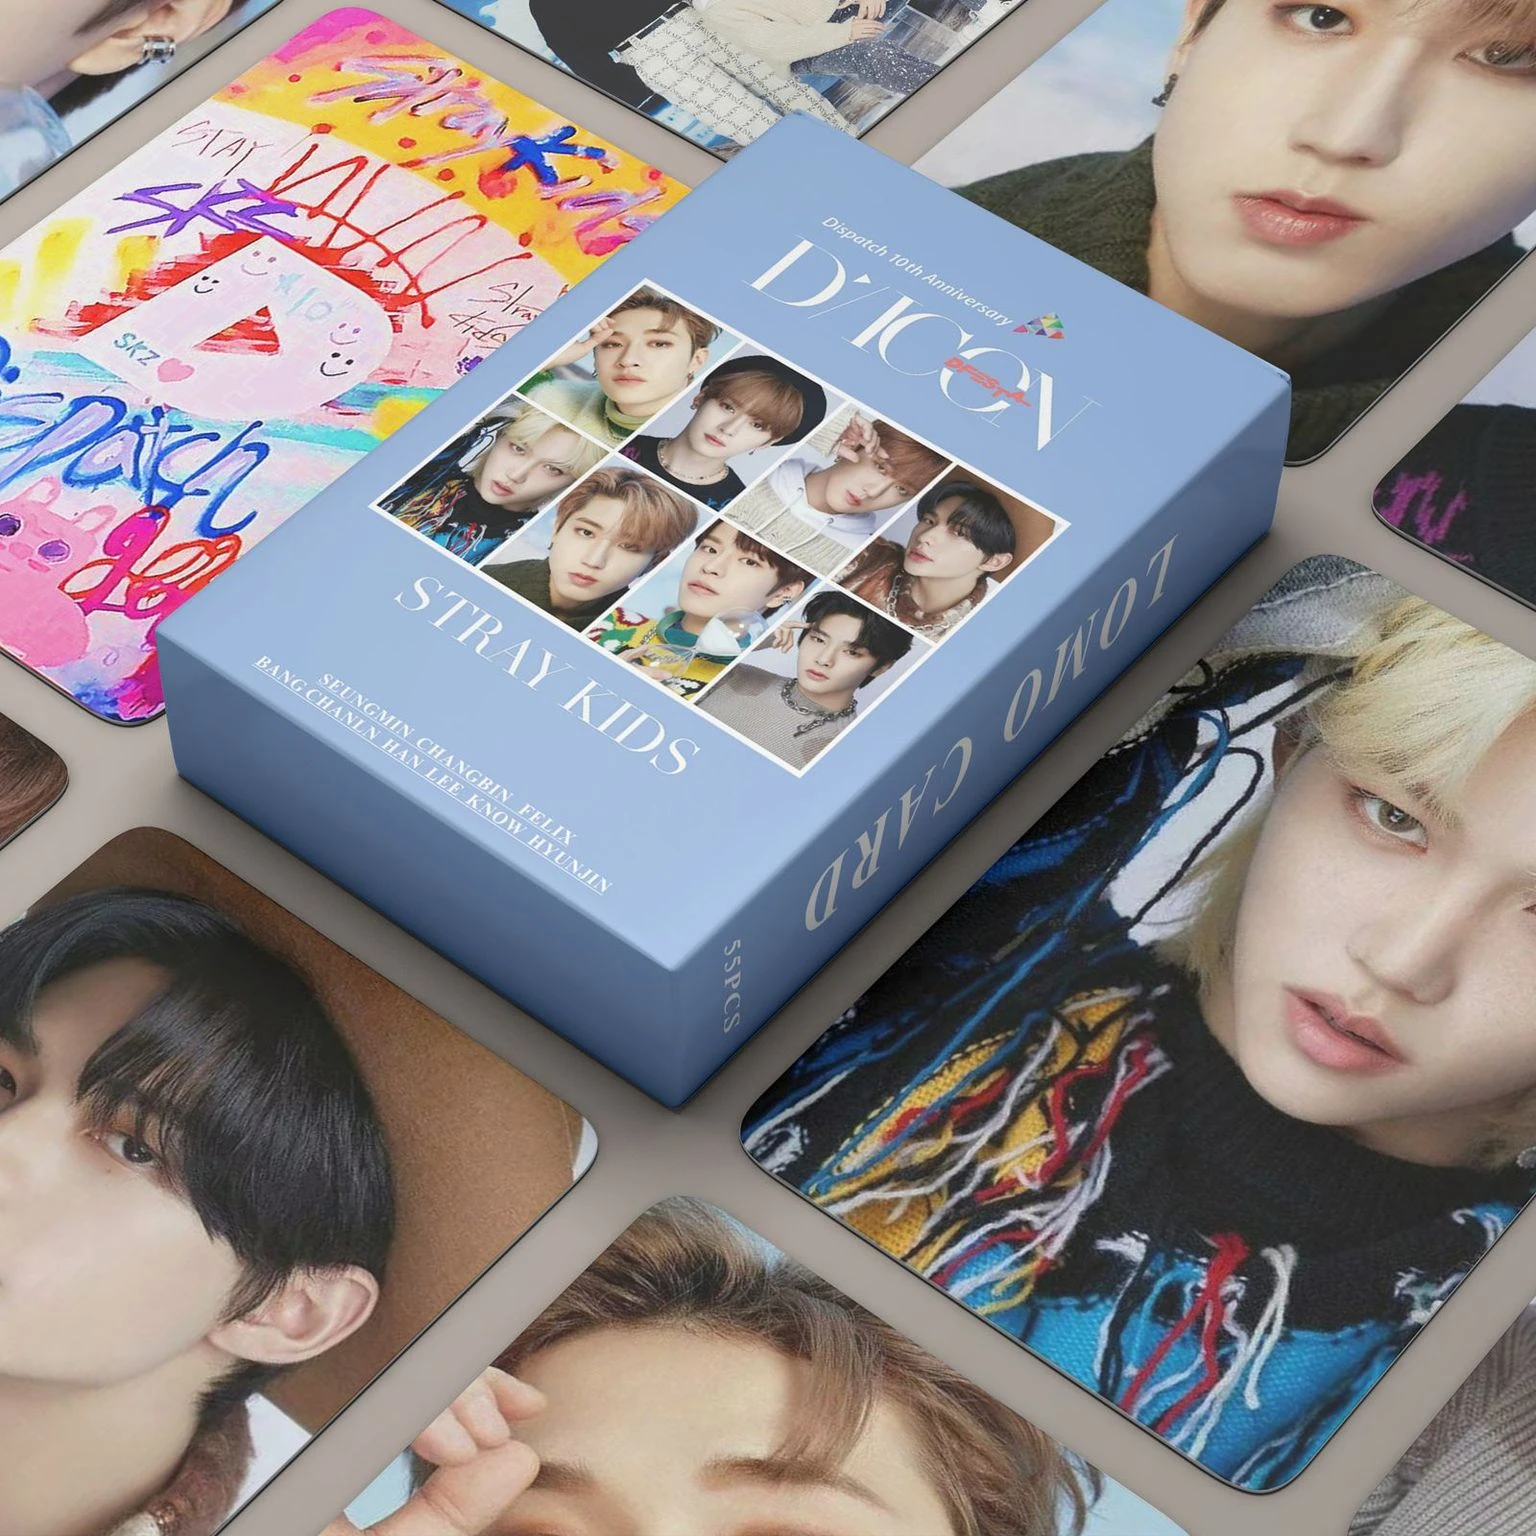 

55pcs/set Kpop StrayKids Lomo Cards D‘festa Magazine StrayKids Photocards for Fans Collection High Quality Dicon Postcards